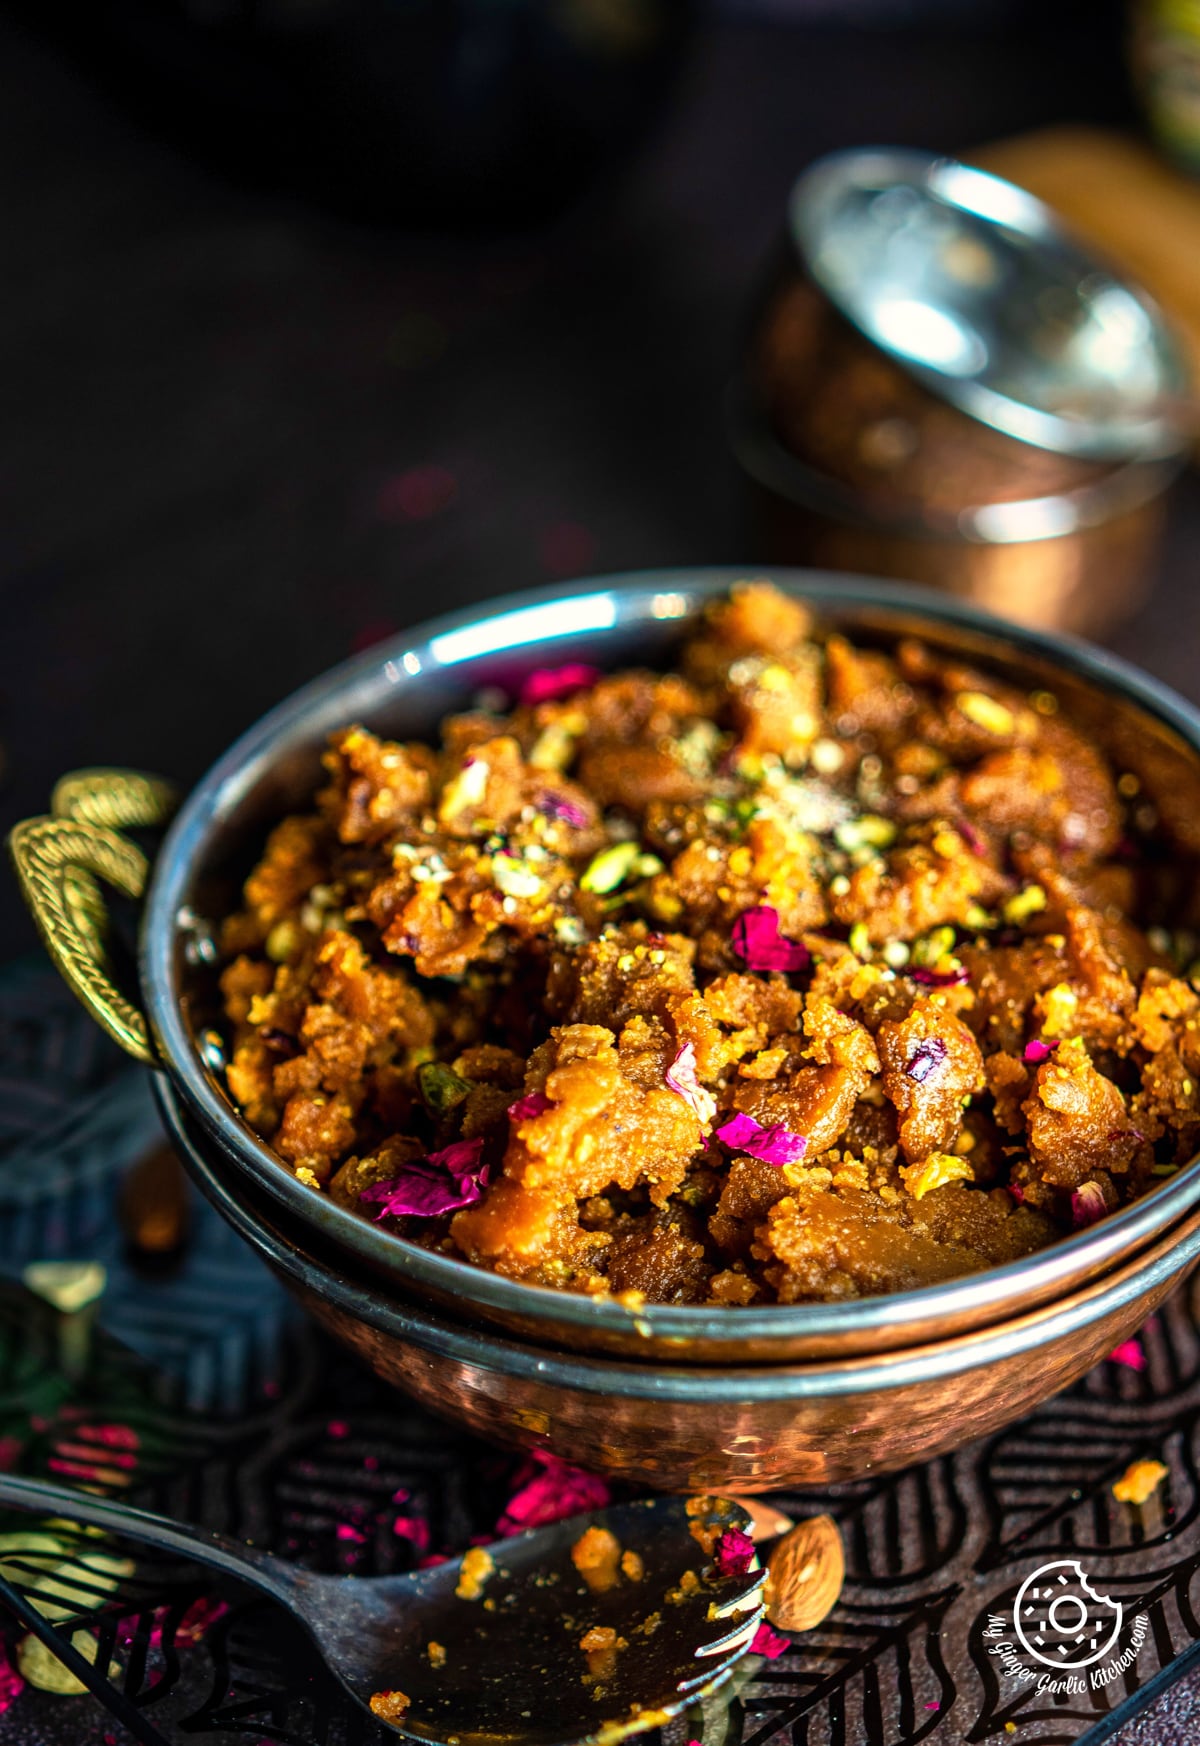 a close up of a besan halwa garnished with dry fruits kept in a copper kadai